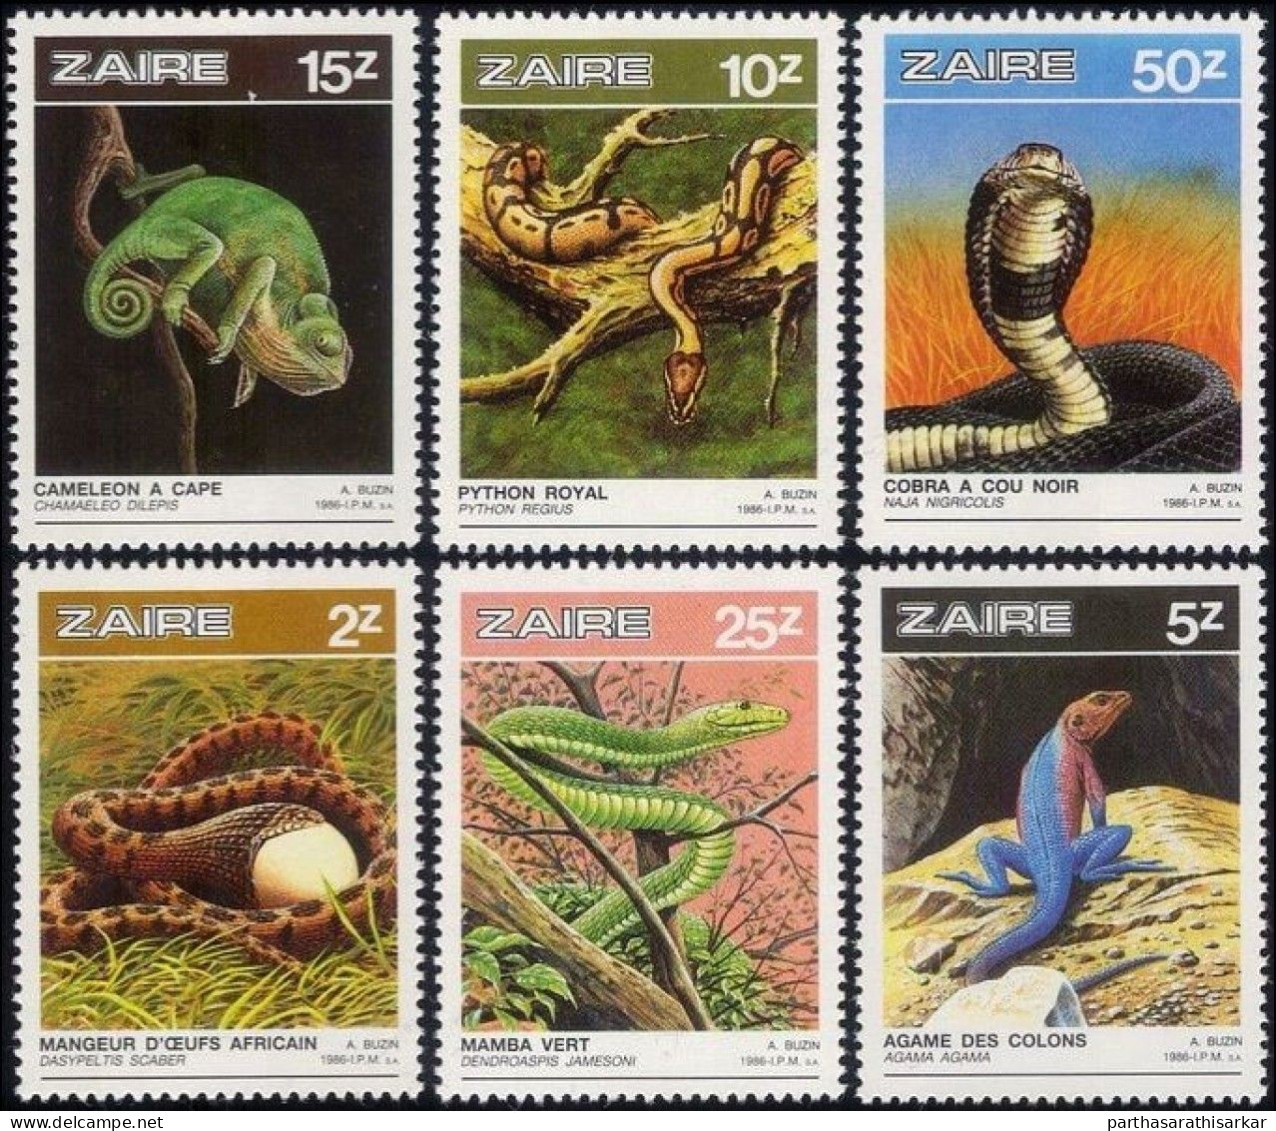 ZAIRE 1986 REPTILES SNAKES LIZARDS NATURE WILDLIFE COMPLETE SET MNH - Serpents